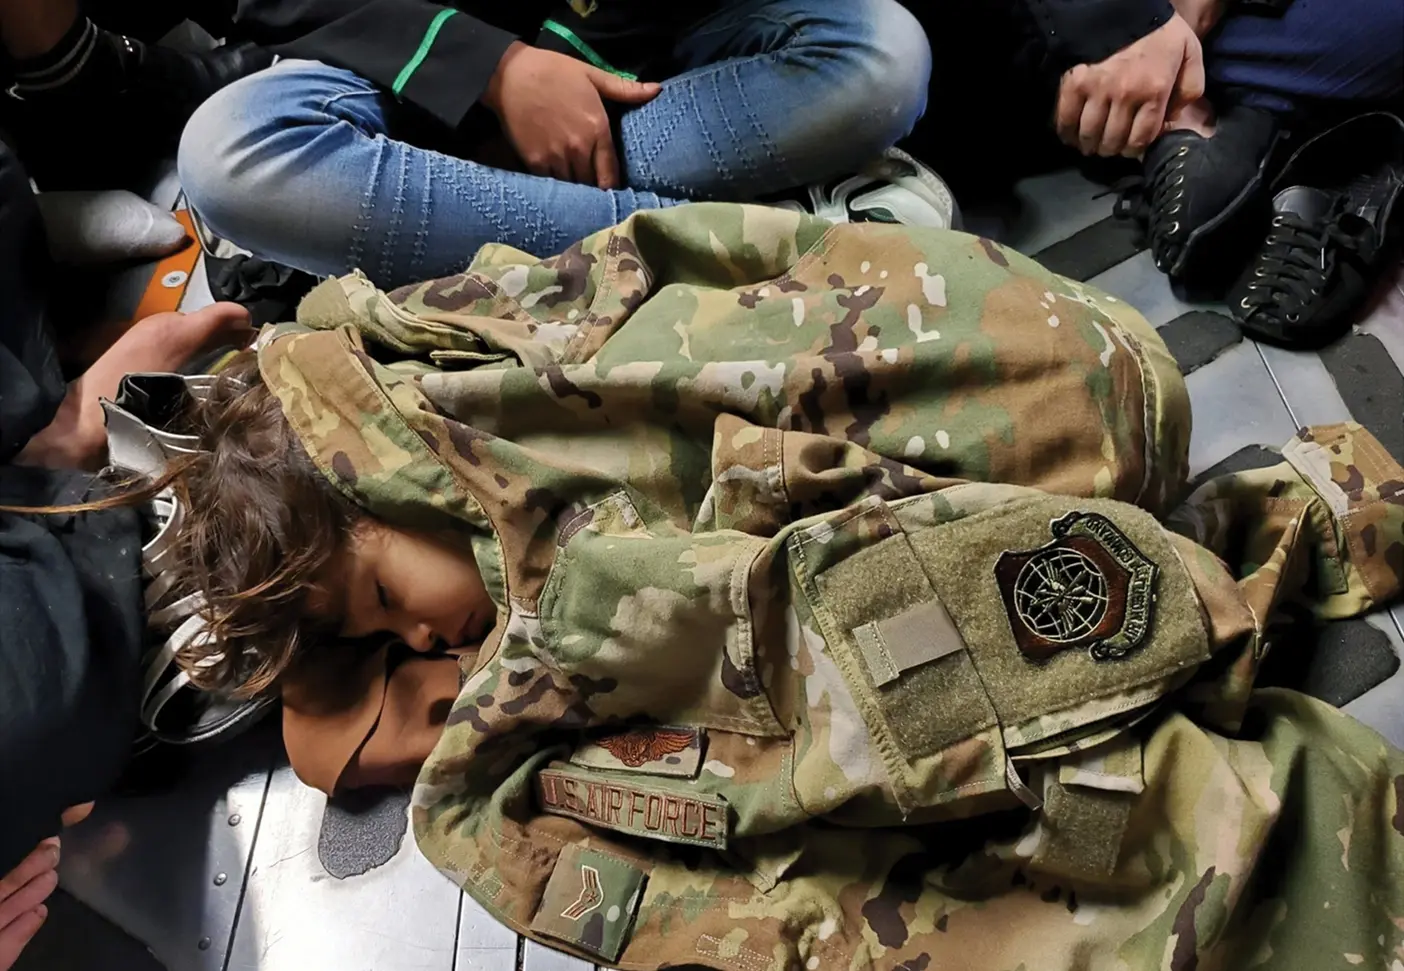 Child sleeping in US Air Force jacket.